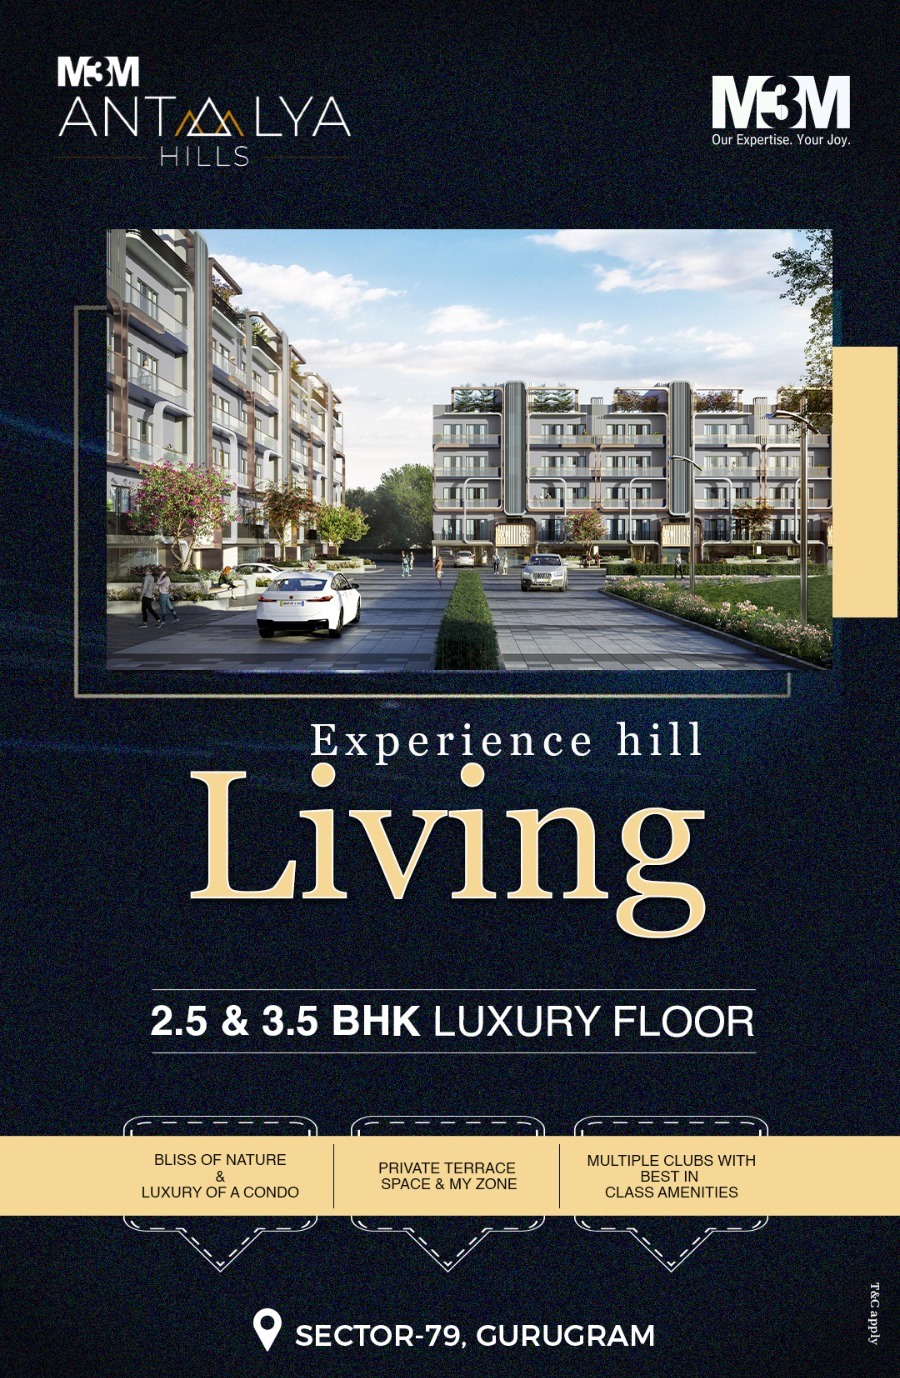 Experience hill living at M3M Antalya Hills in Sec 79, Gurgaon Update